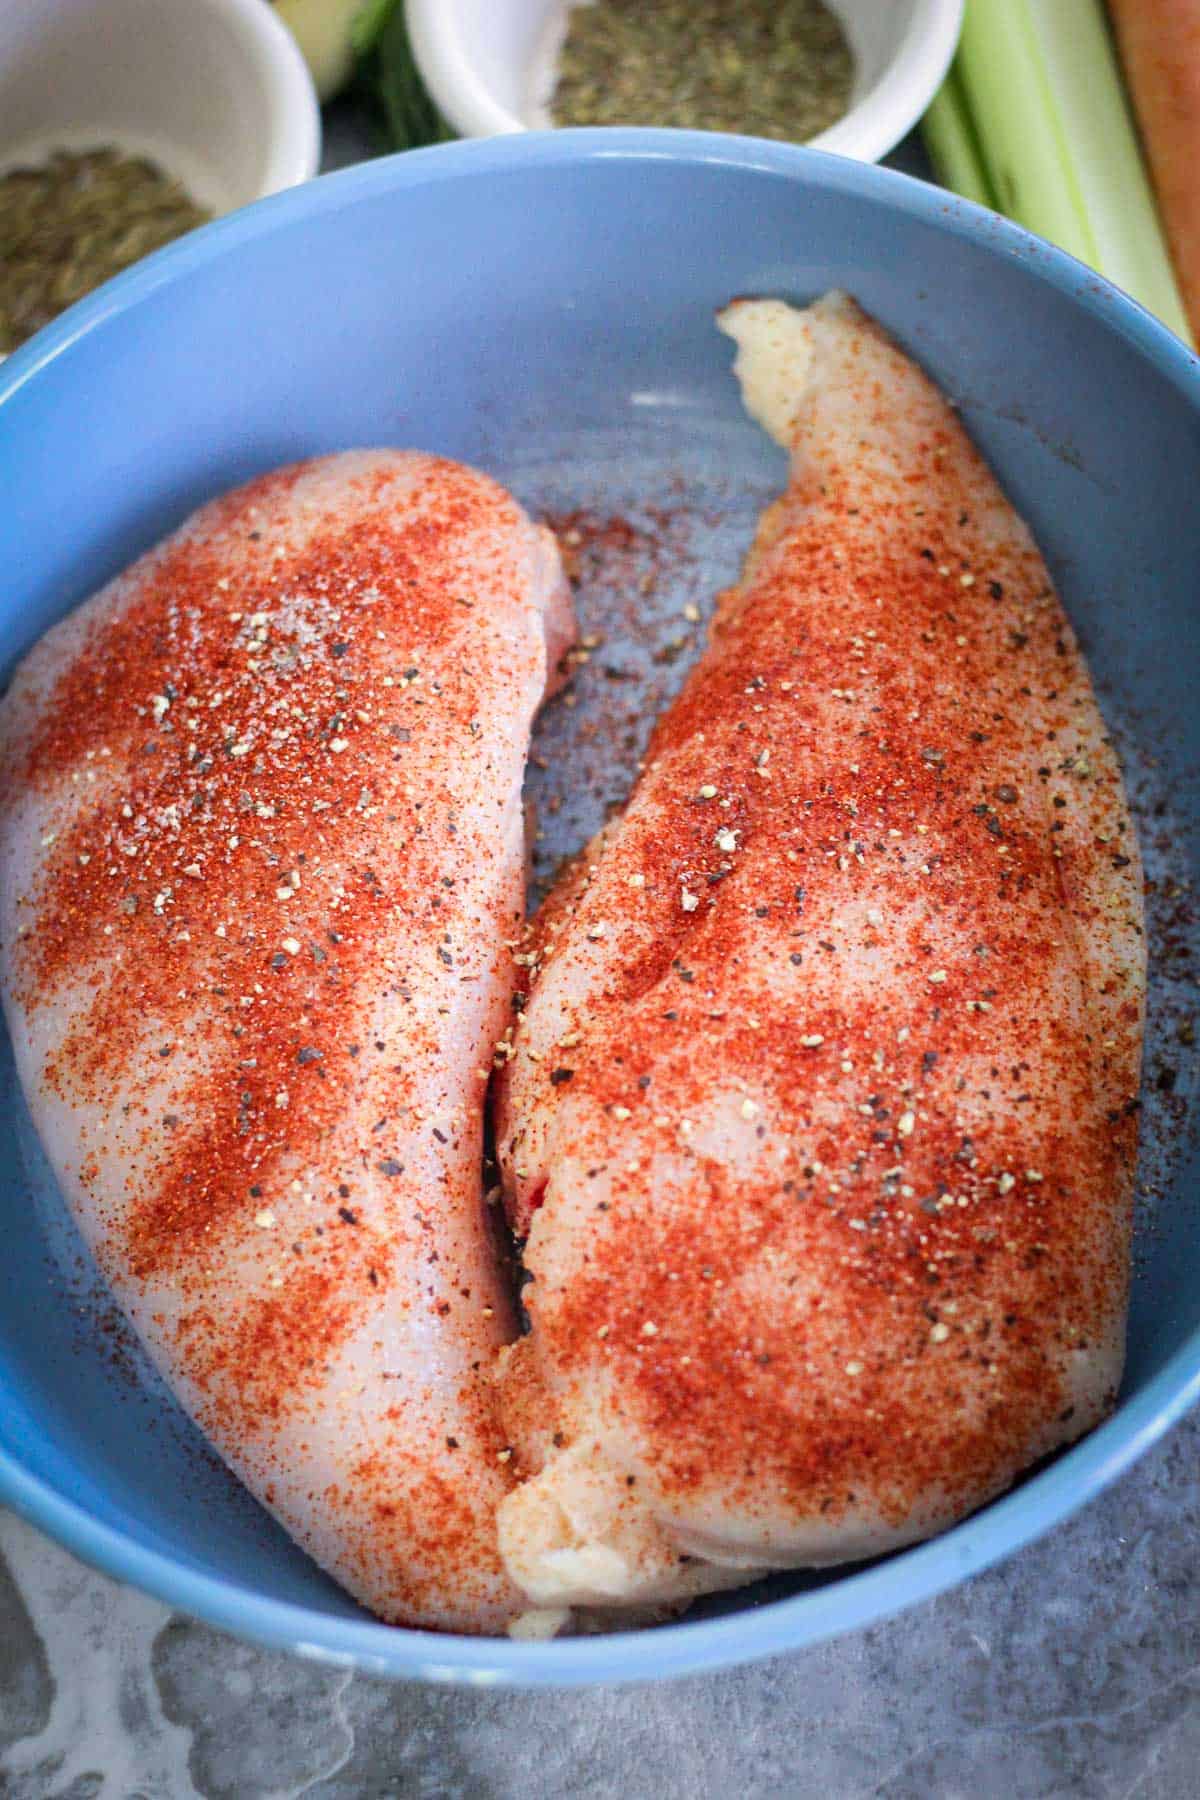 Two seasoned chicken breasts on a plate. Seasoning has salt, pepper and paprika.